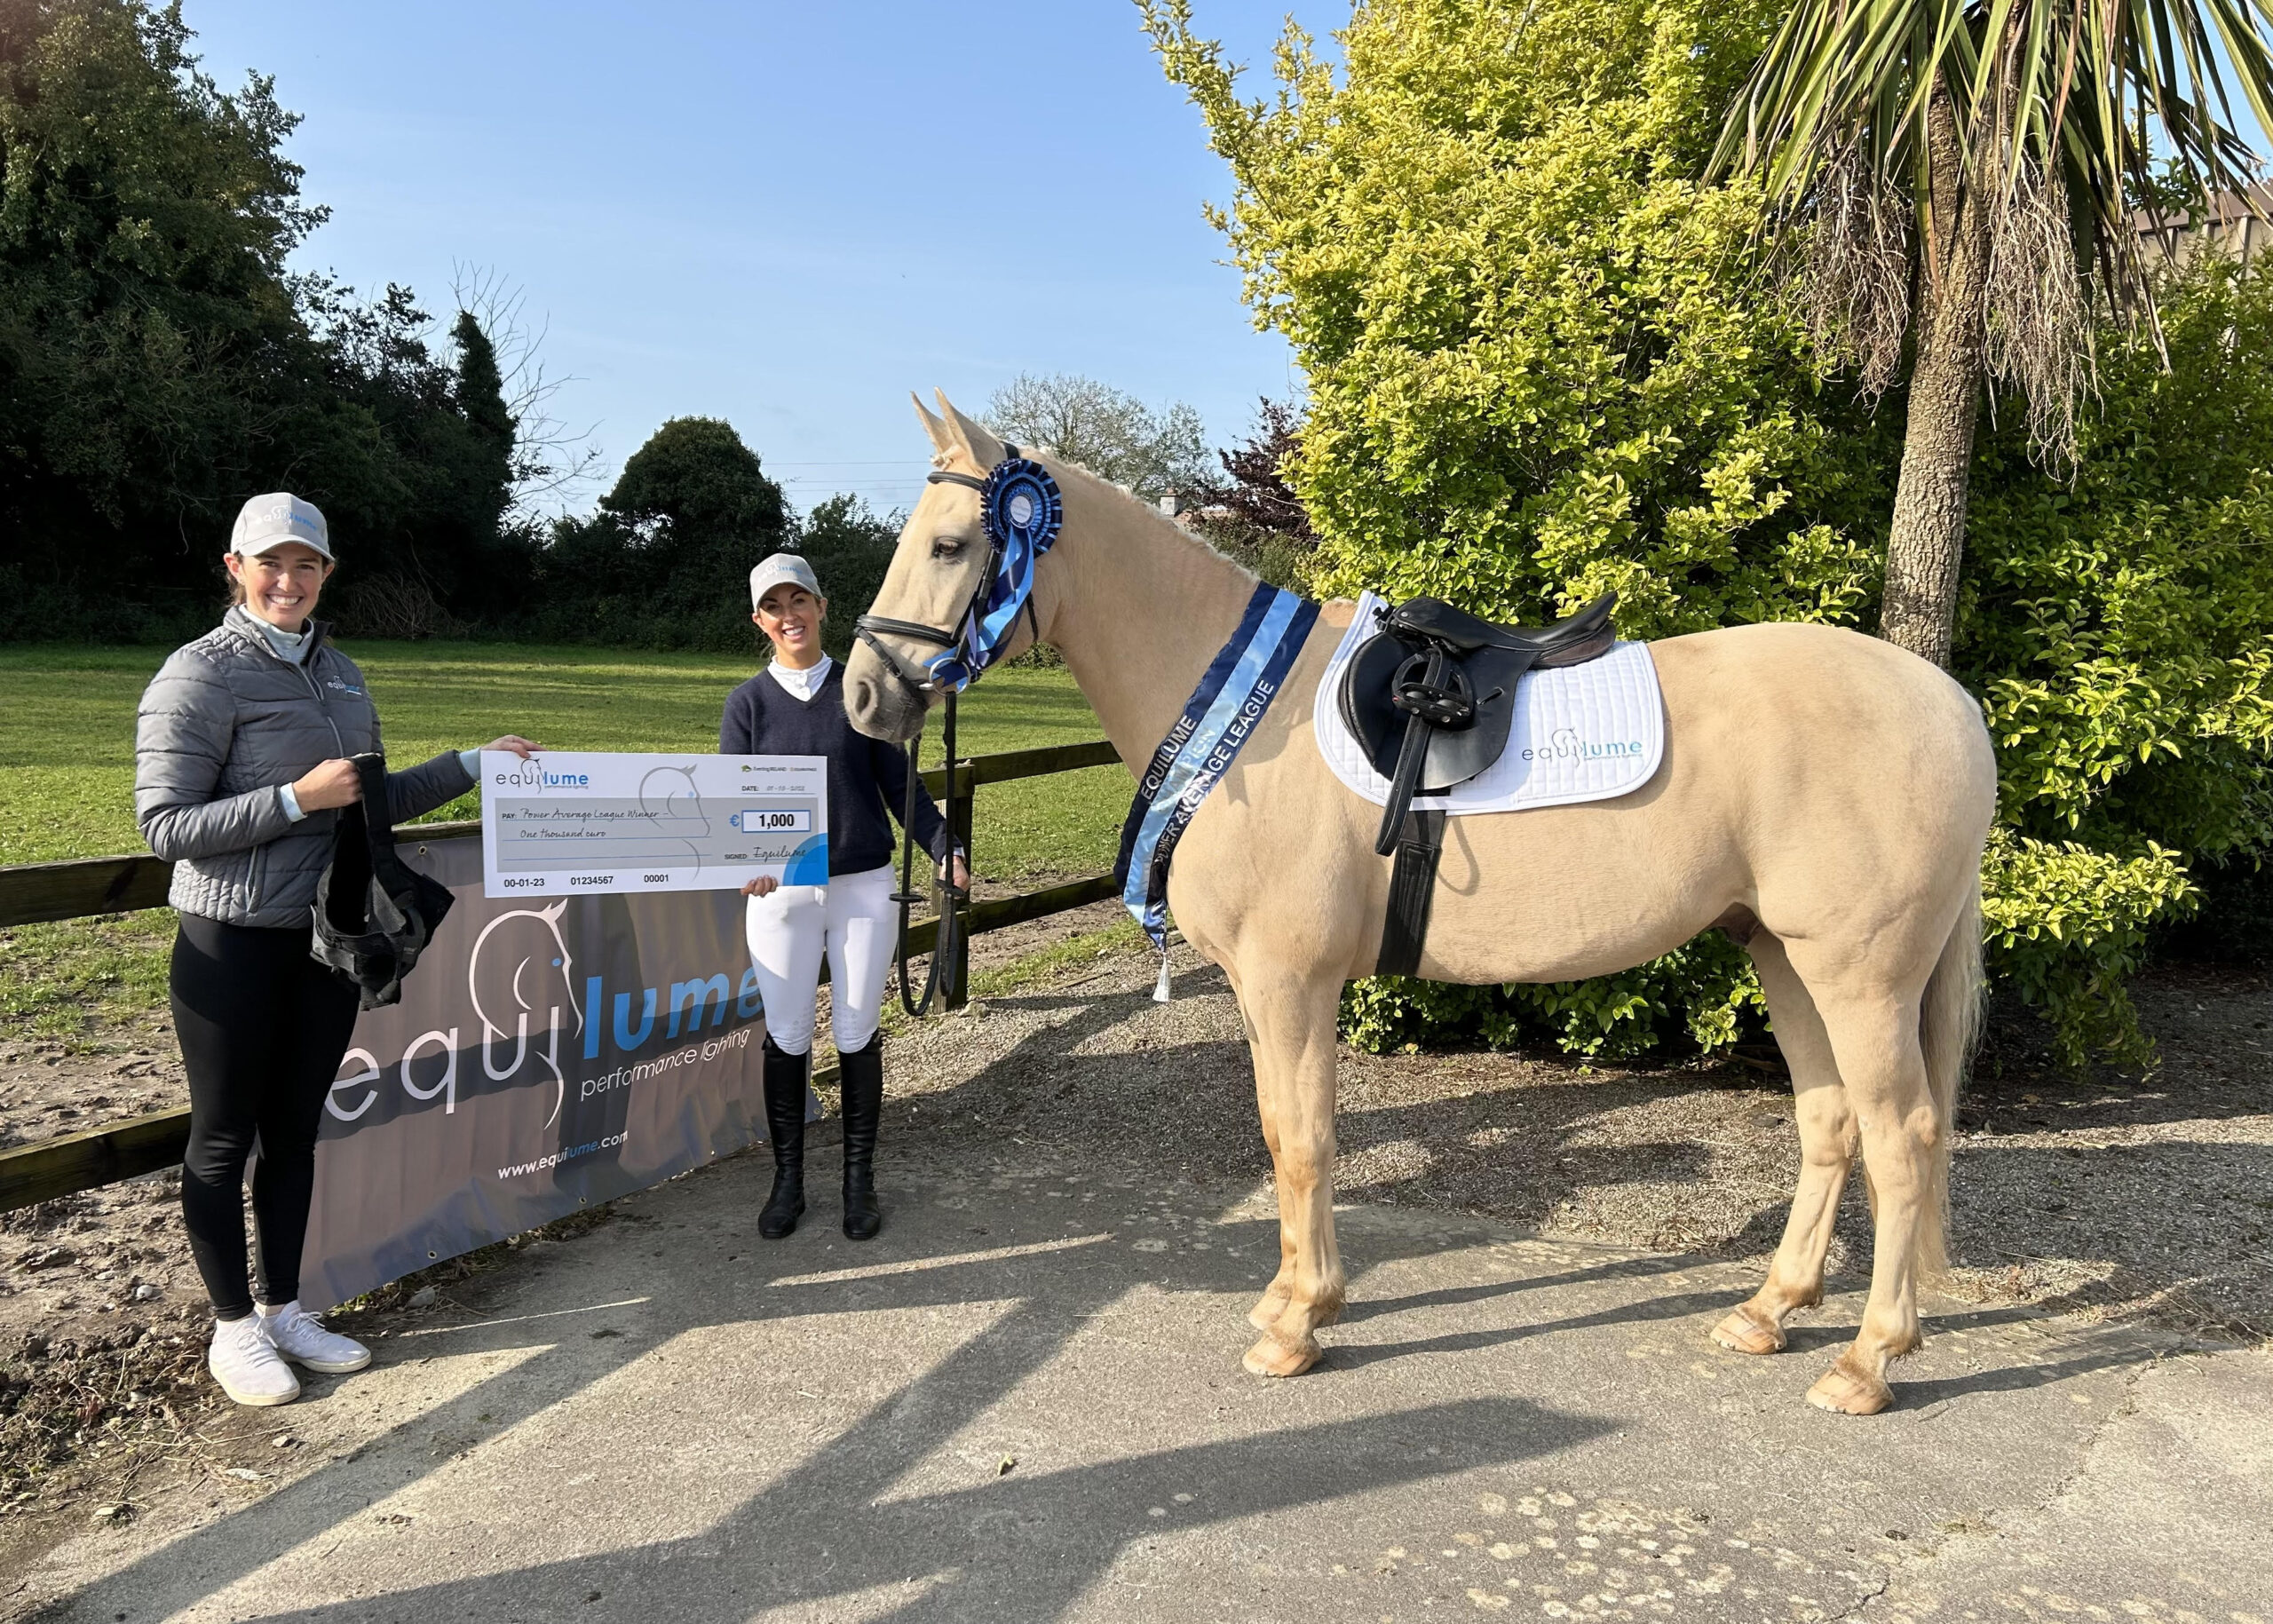 Alyssa O'Neill from Equiratings presents the winner of the Power Average League, Rolline O'Callaghan, with a presentation cheque and Equilume Cashel Light Mask. Rolline holds her palomino horse Splendid B.